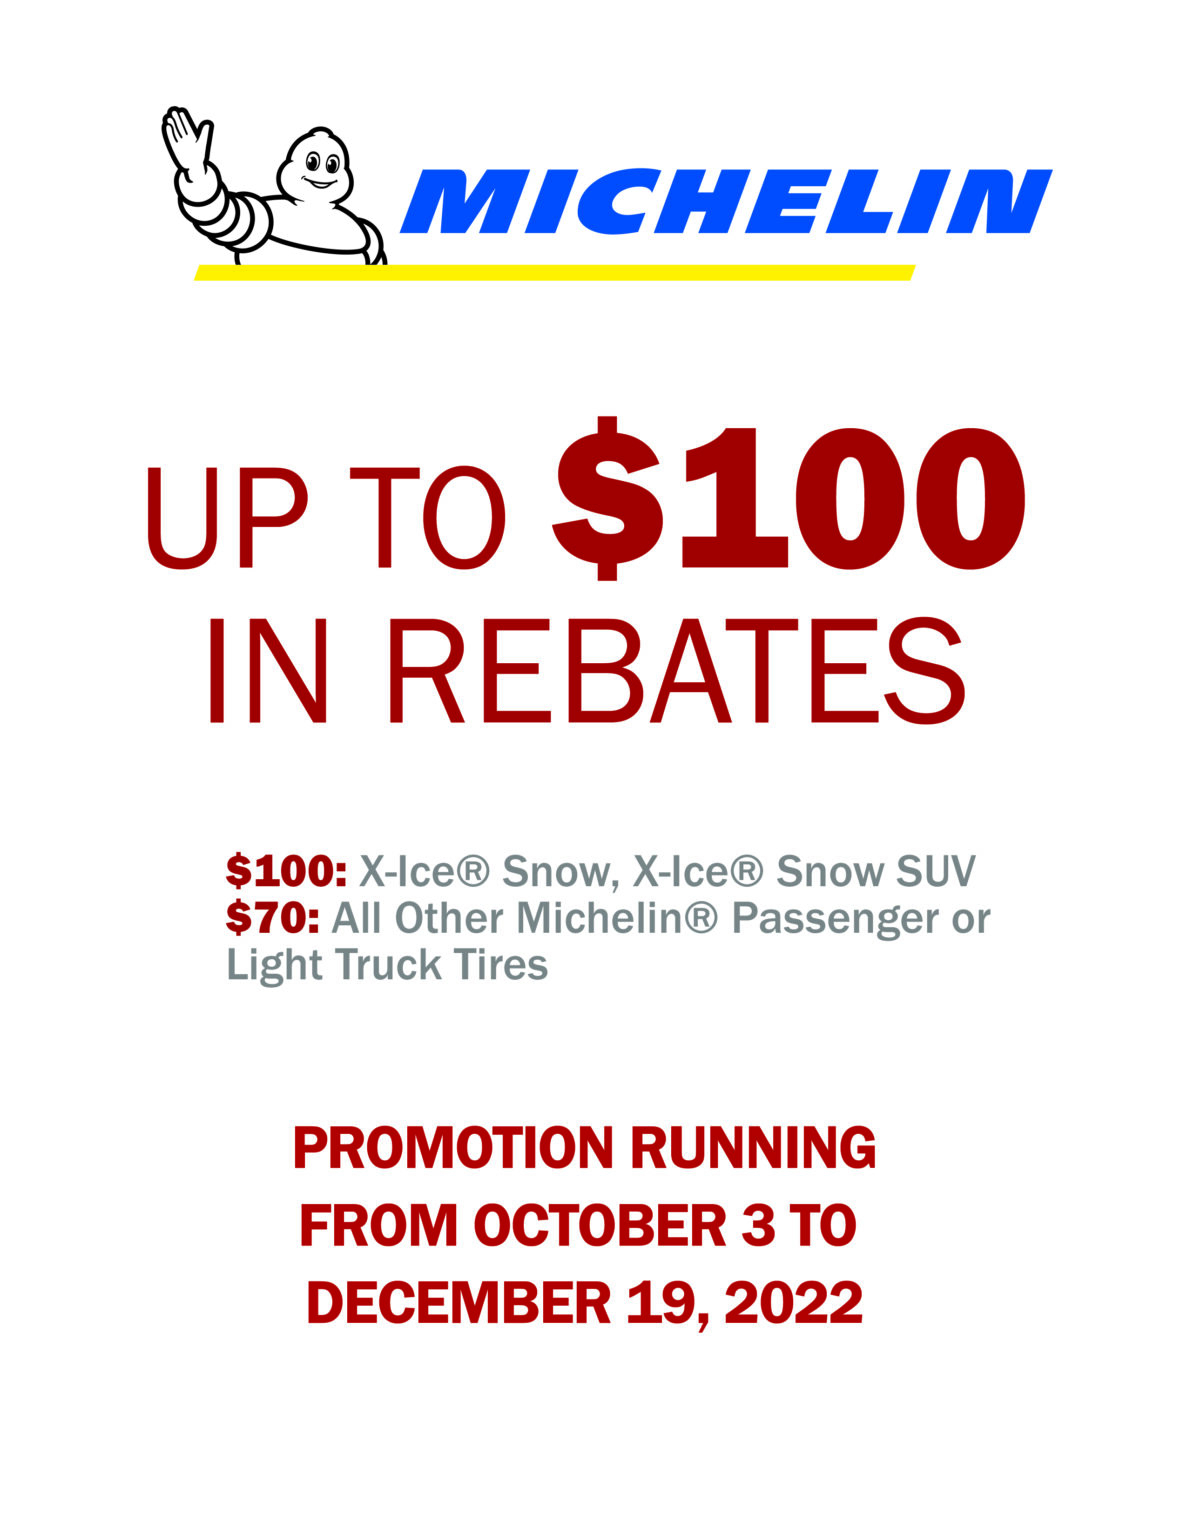 Michelin Rebate Fall 2022 Motion Tyres